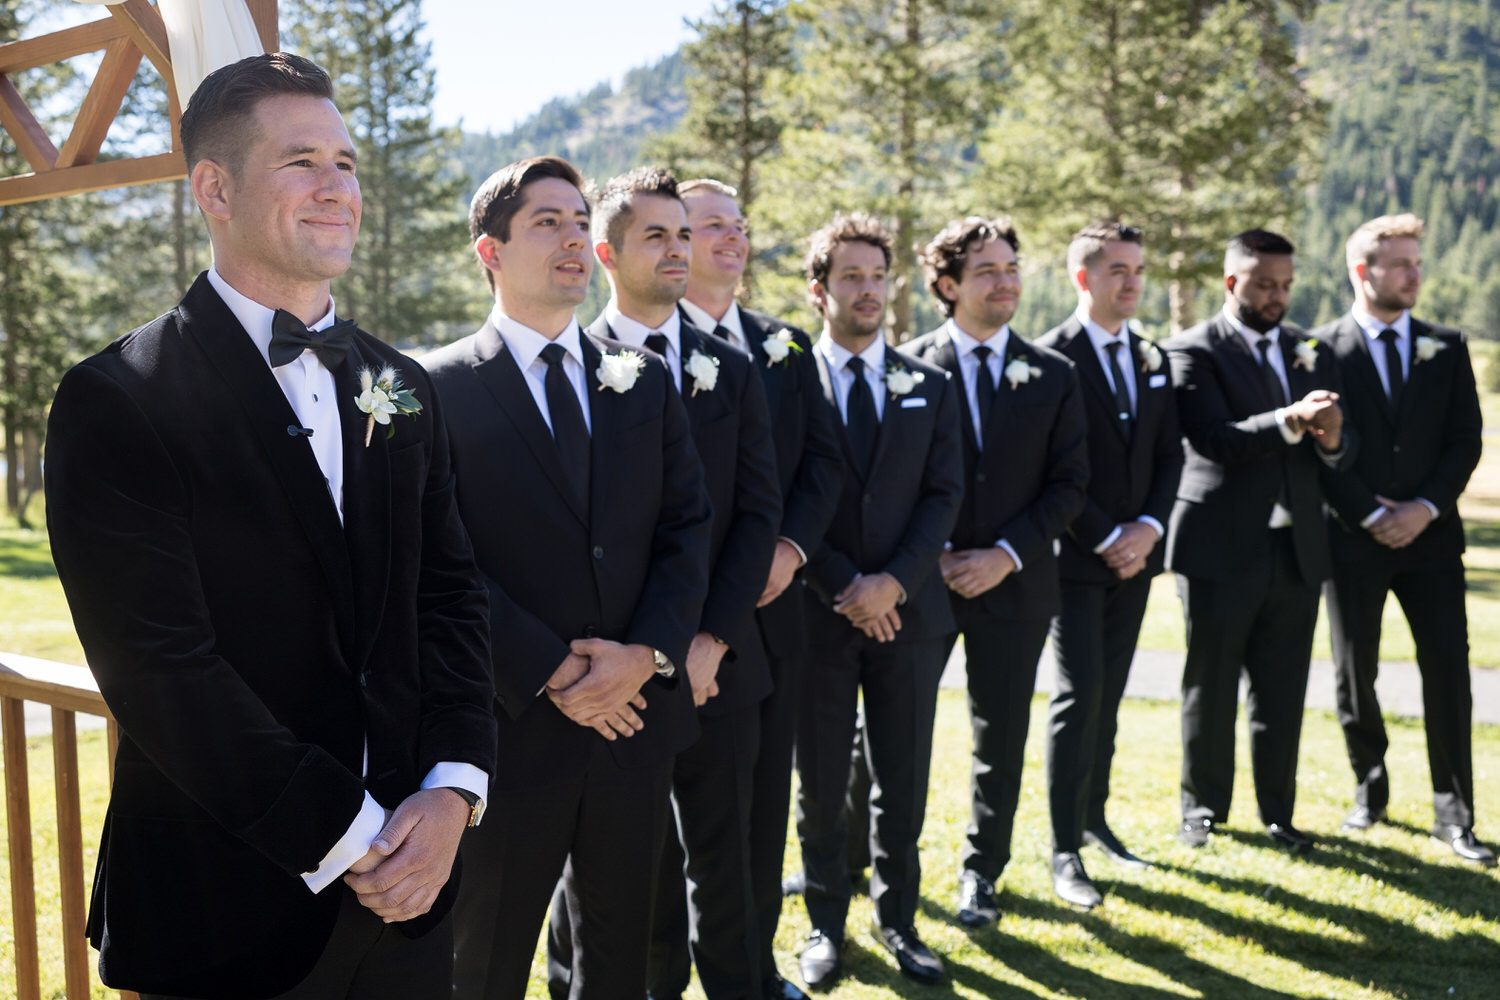 A groom and his eight groomsmen wait for the bride to arrive at an outdoor black tie wedding ceremony.